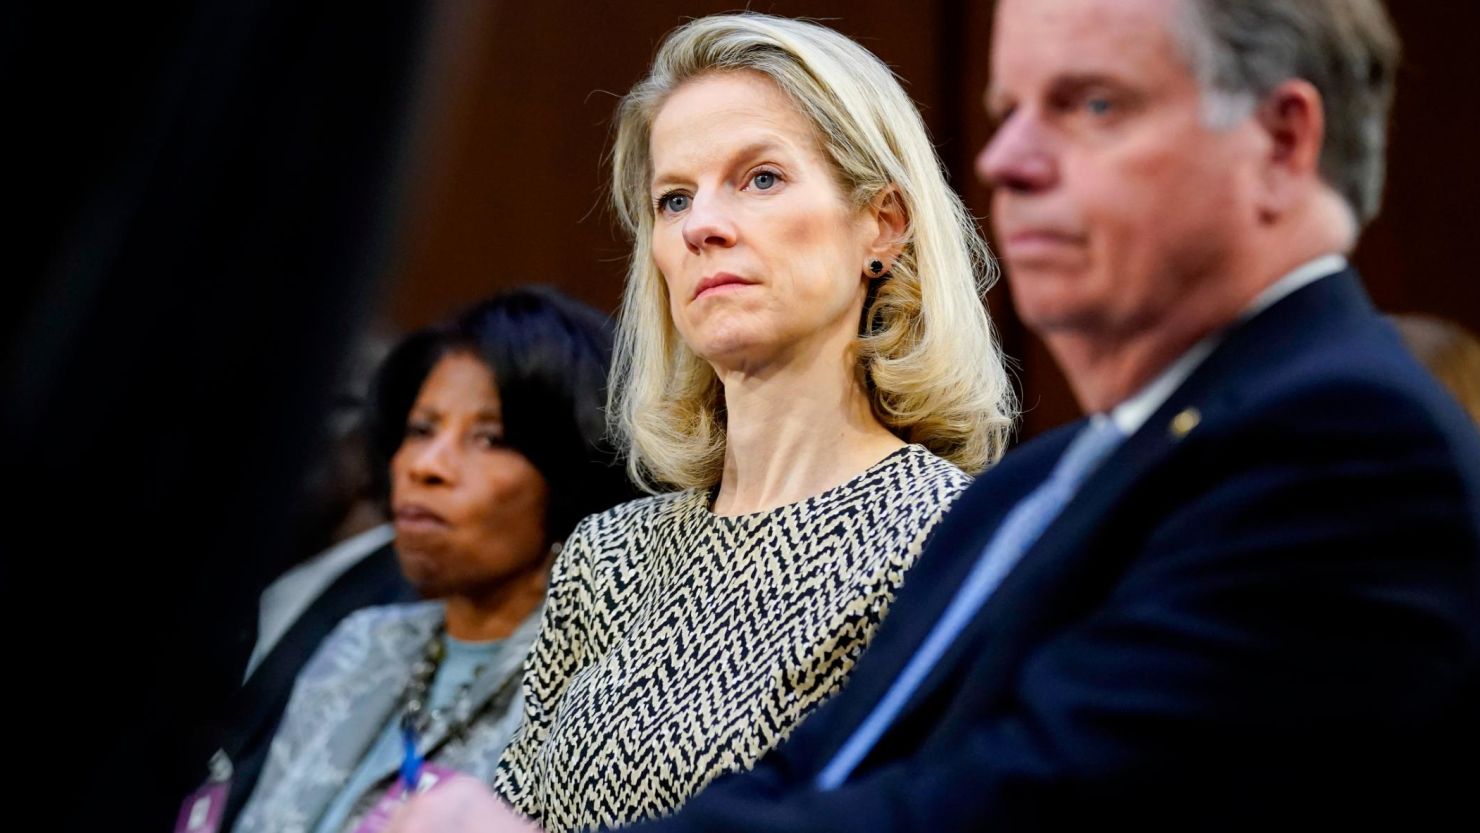 White House Counsel Dana Remus, center, listens during a confirmation hearing for Supreme Court nominee Ketanji Brown Jackson before the Senate Judiciary Committee on Capitol Hill in Washington, March 22, 2022.